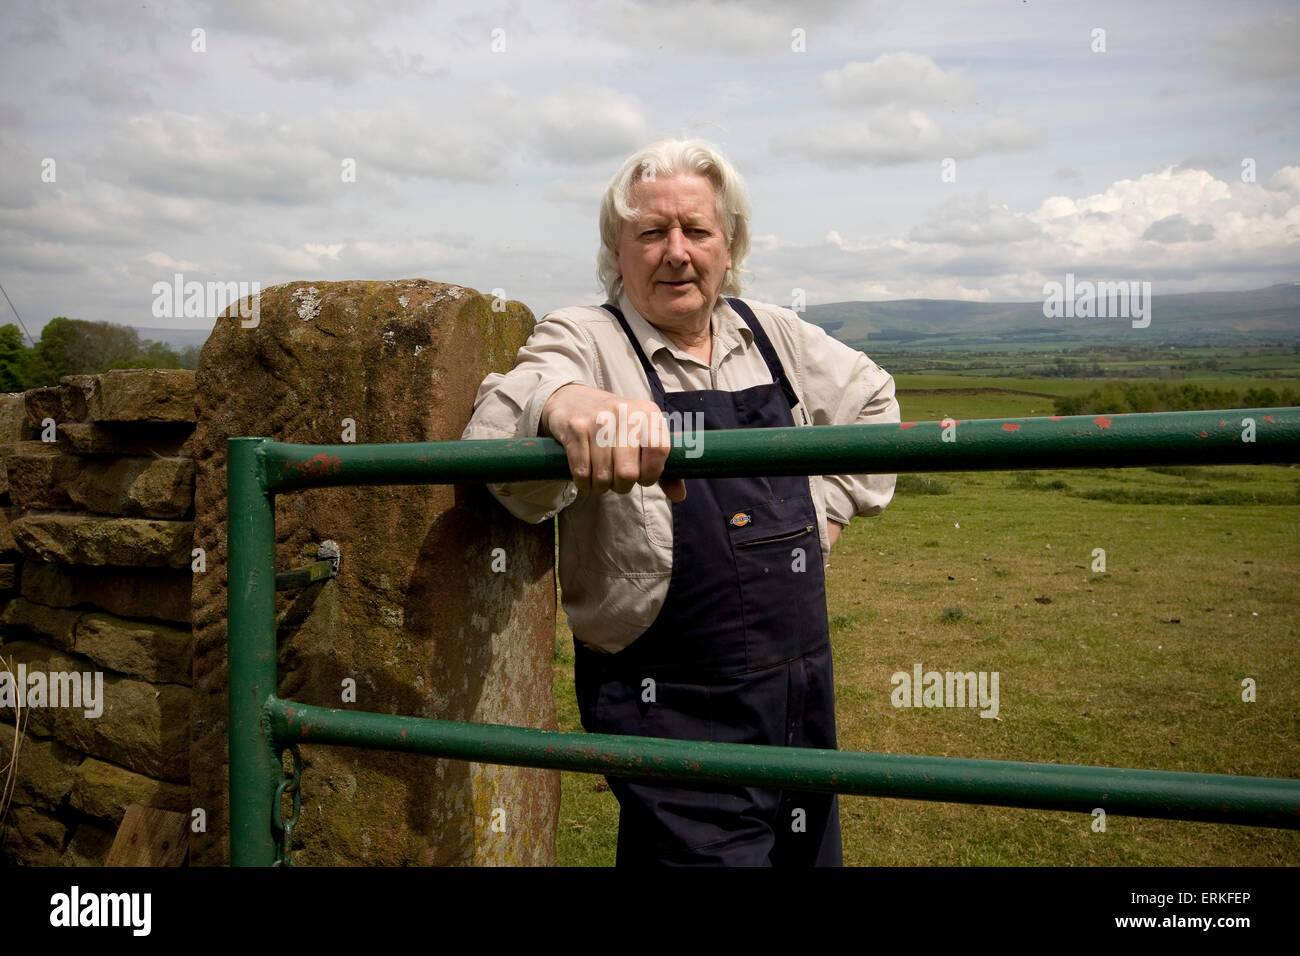 Investigative journalist Andrew Jennings, pictured at his home on a farm in Inglewood, near Penrith in Cumbria. Jennings has conducted many investigations into corruption at the International Olympic Committee and football's world governing body FIFA. He was instrumental in bringing about the 2015 FBI investigation into corruption at FIFA which led to the resignation of president Sepp Blatter. Stock Photo